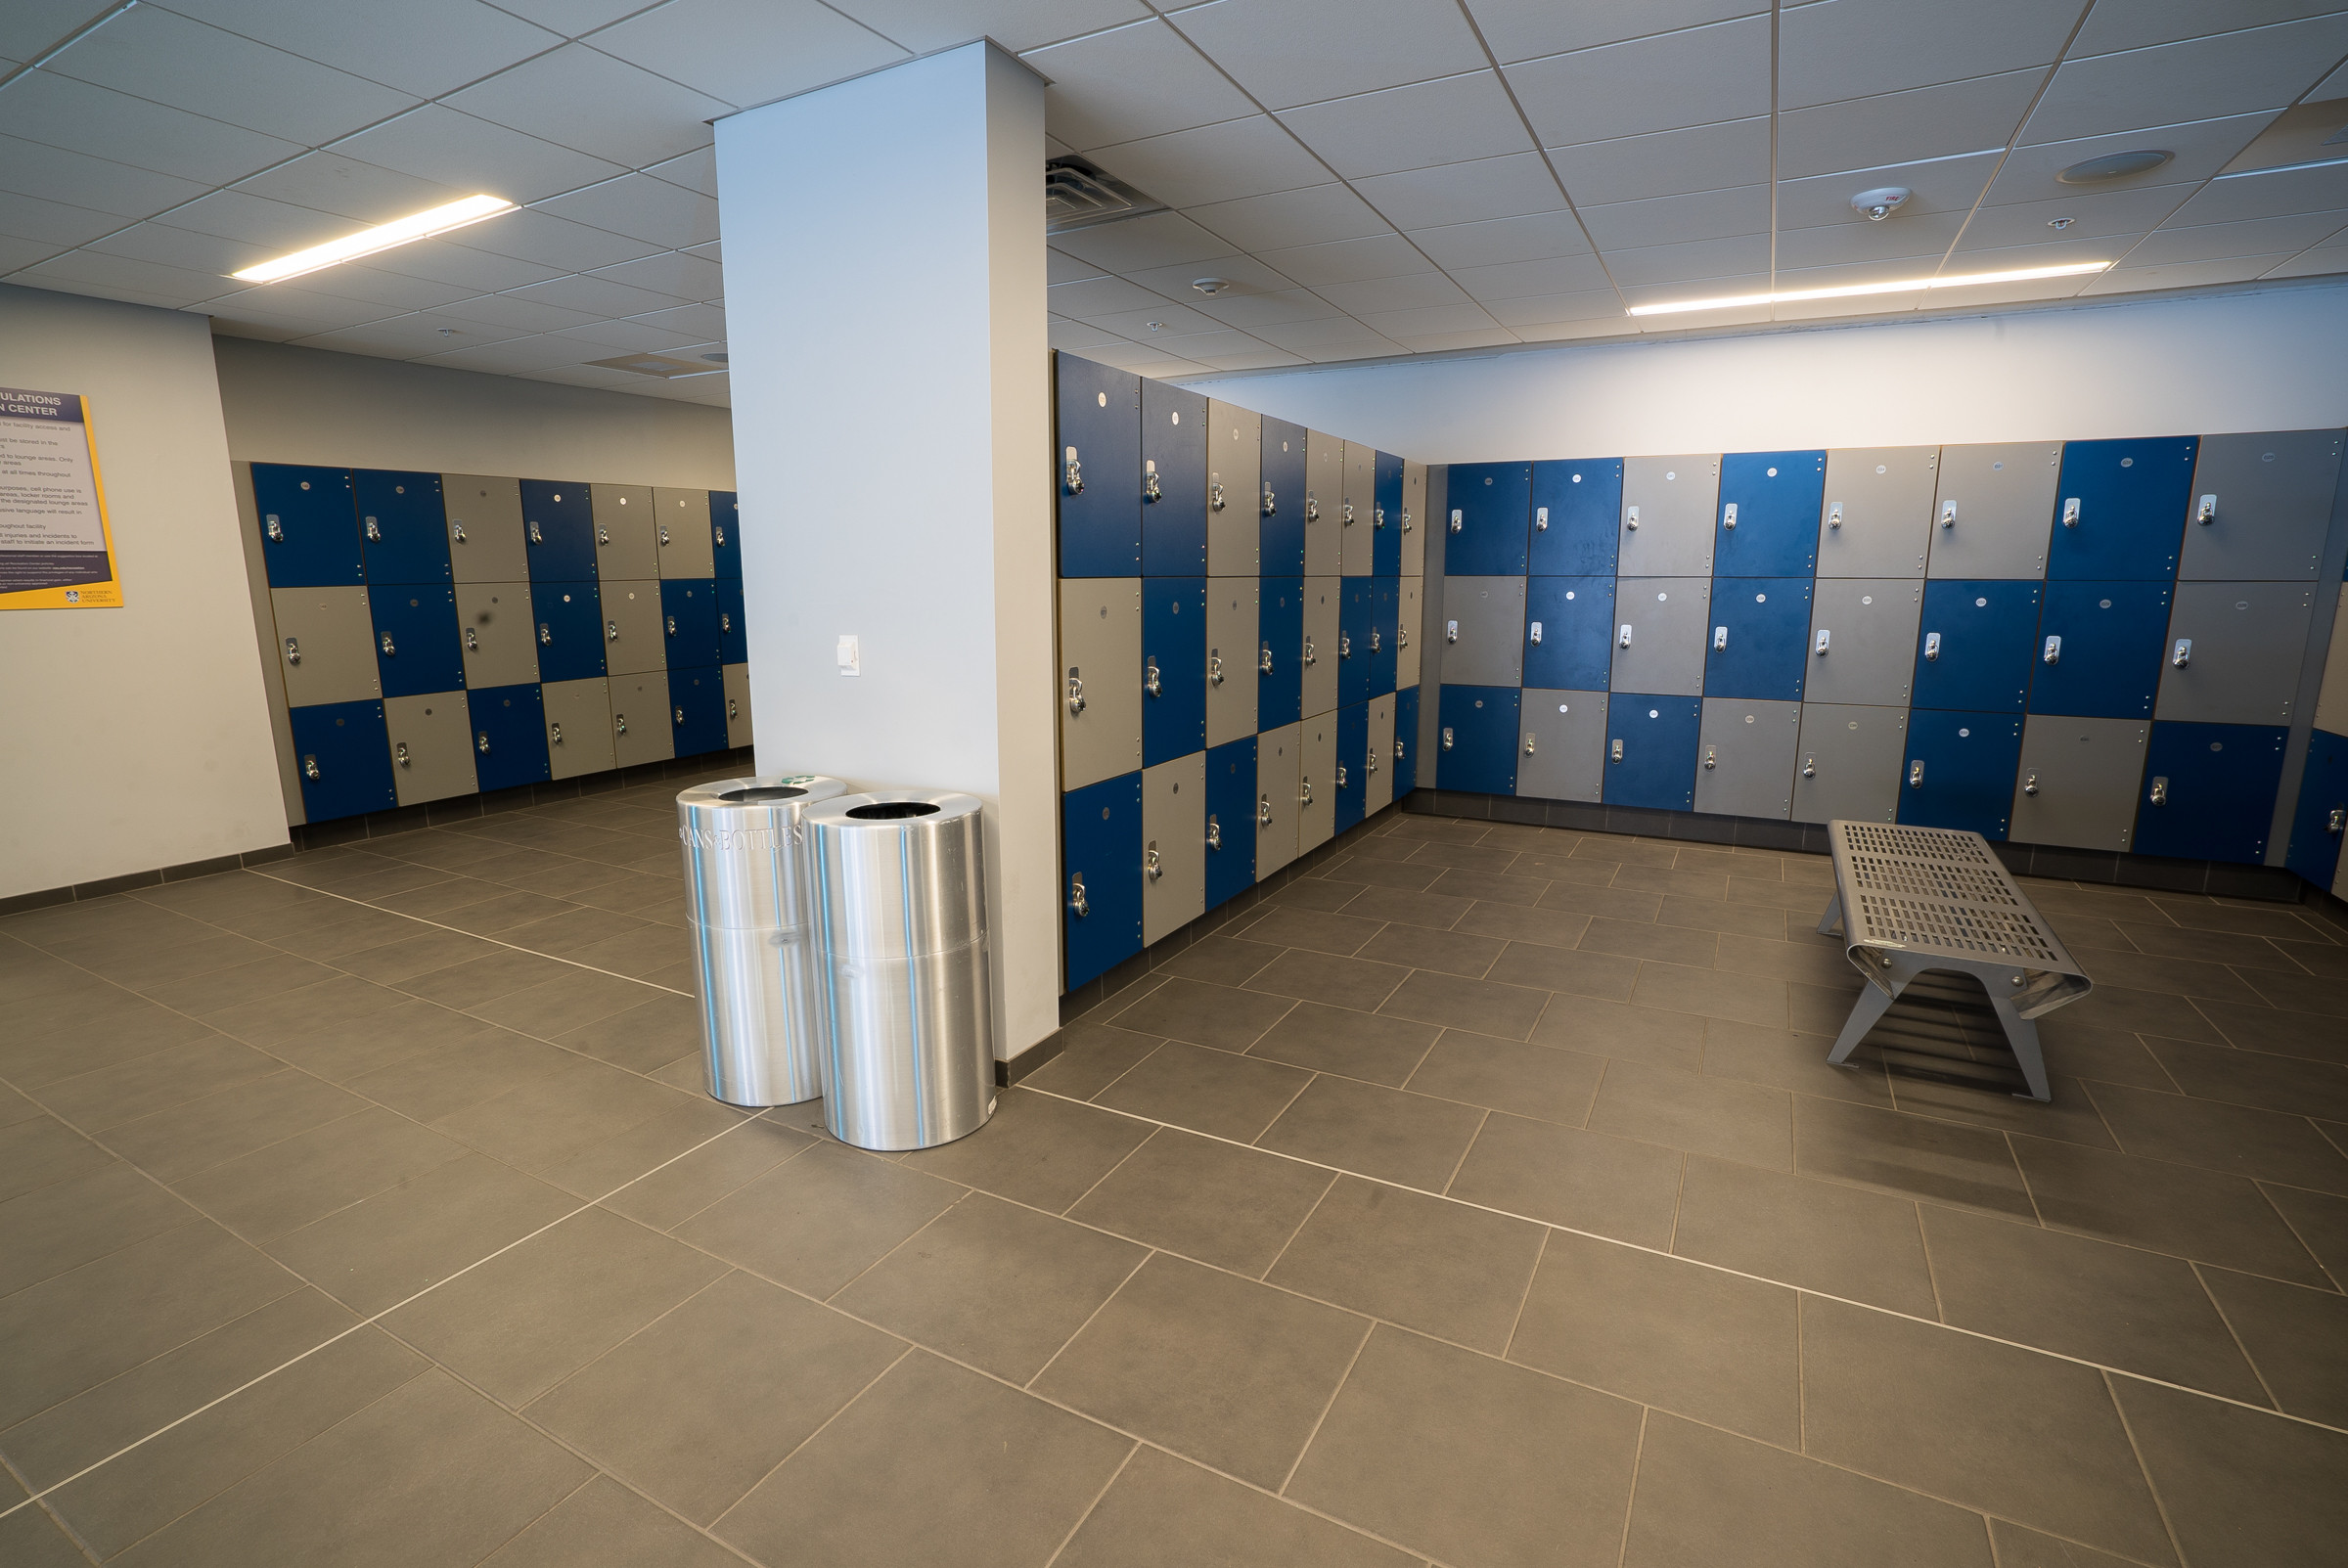 View of locker room showing rows of lockers inside campus recreation building.